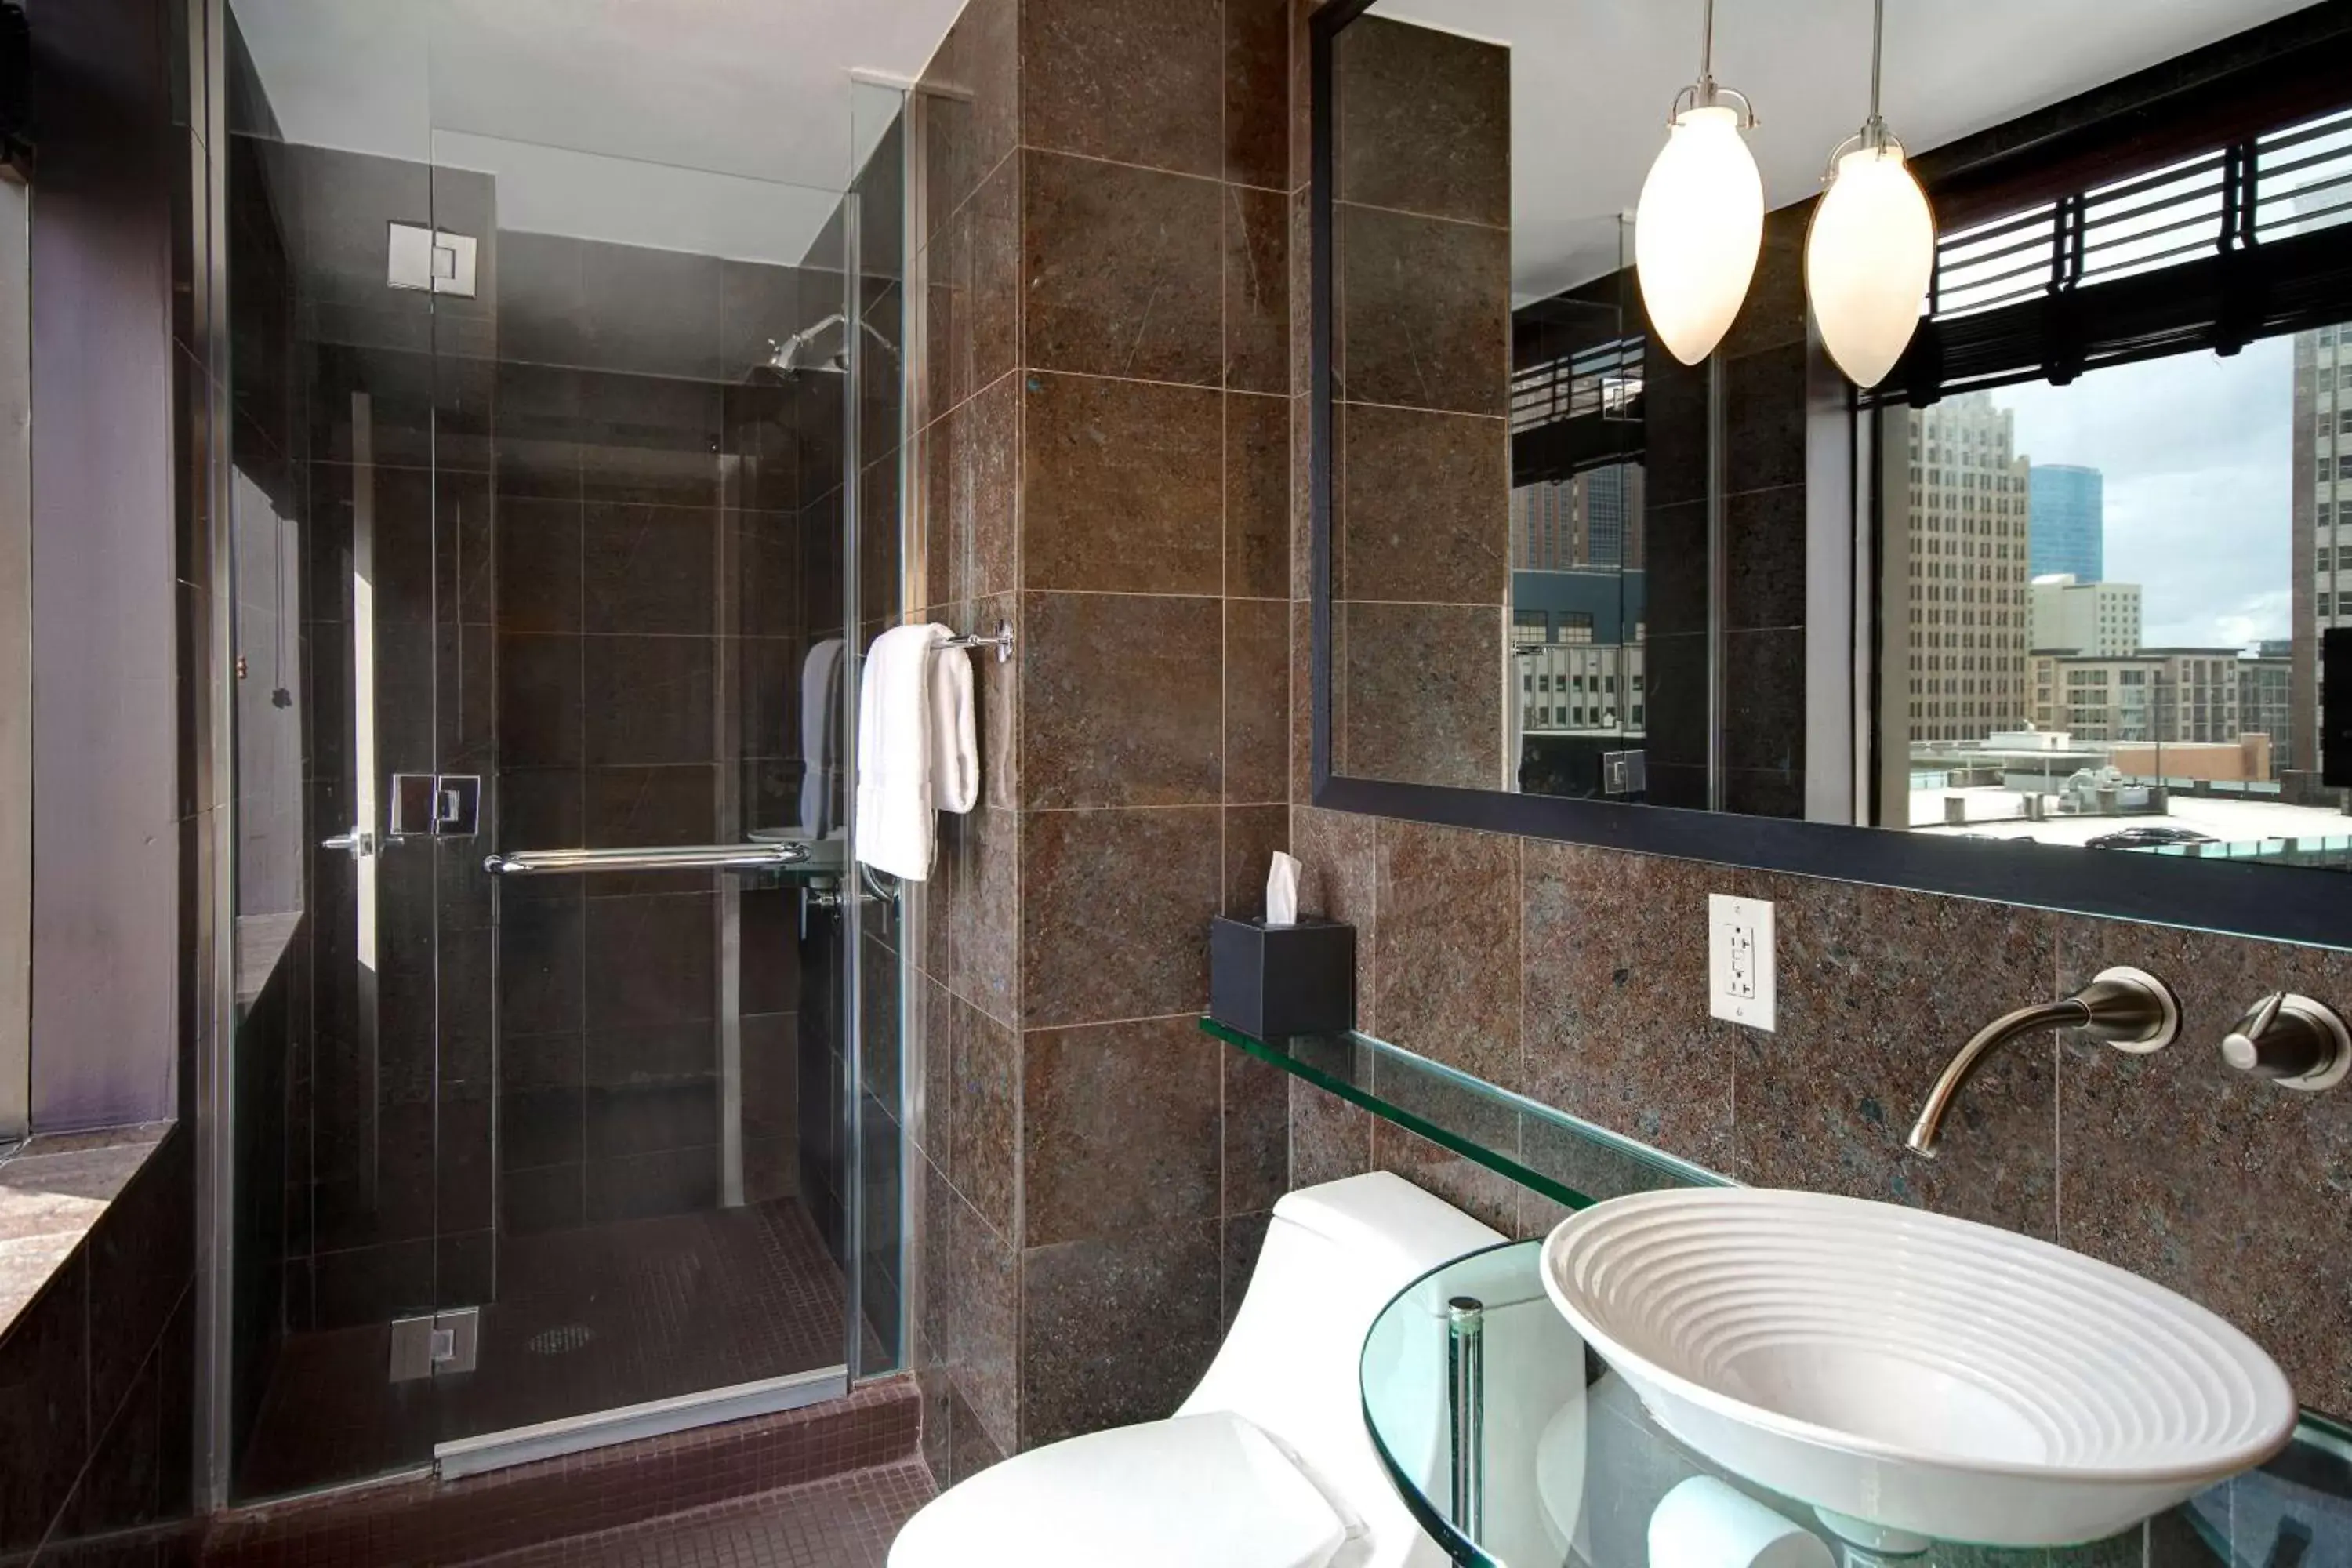 Bathroom in The Sam Houston Hotel, Curio Collection by Hilton